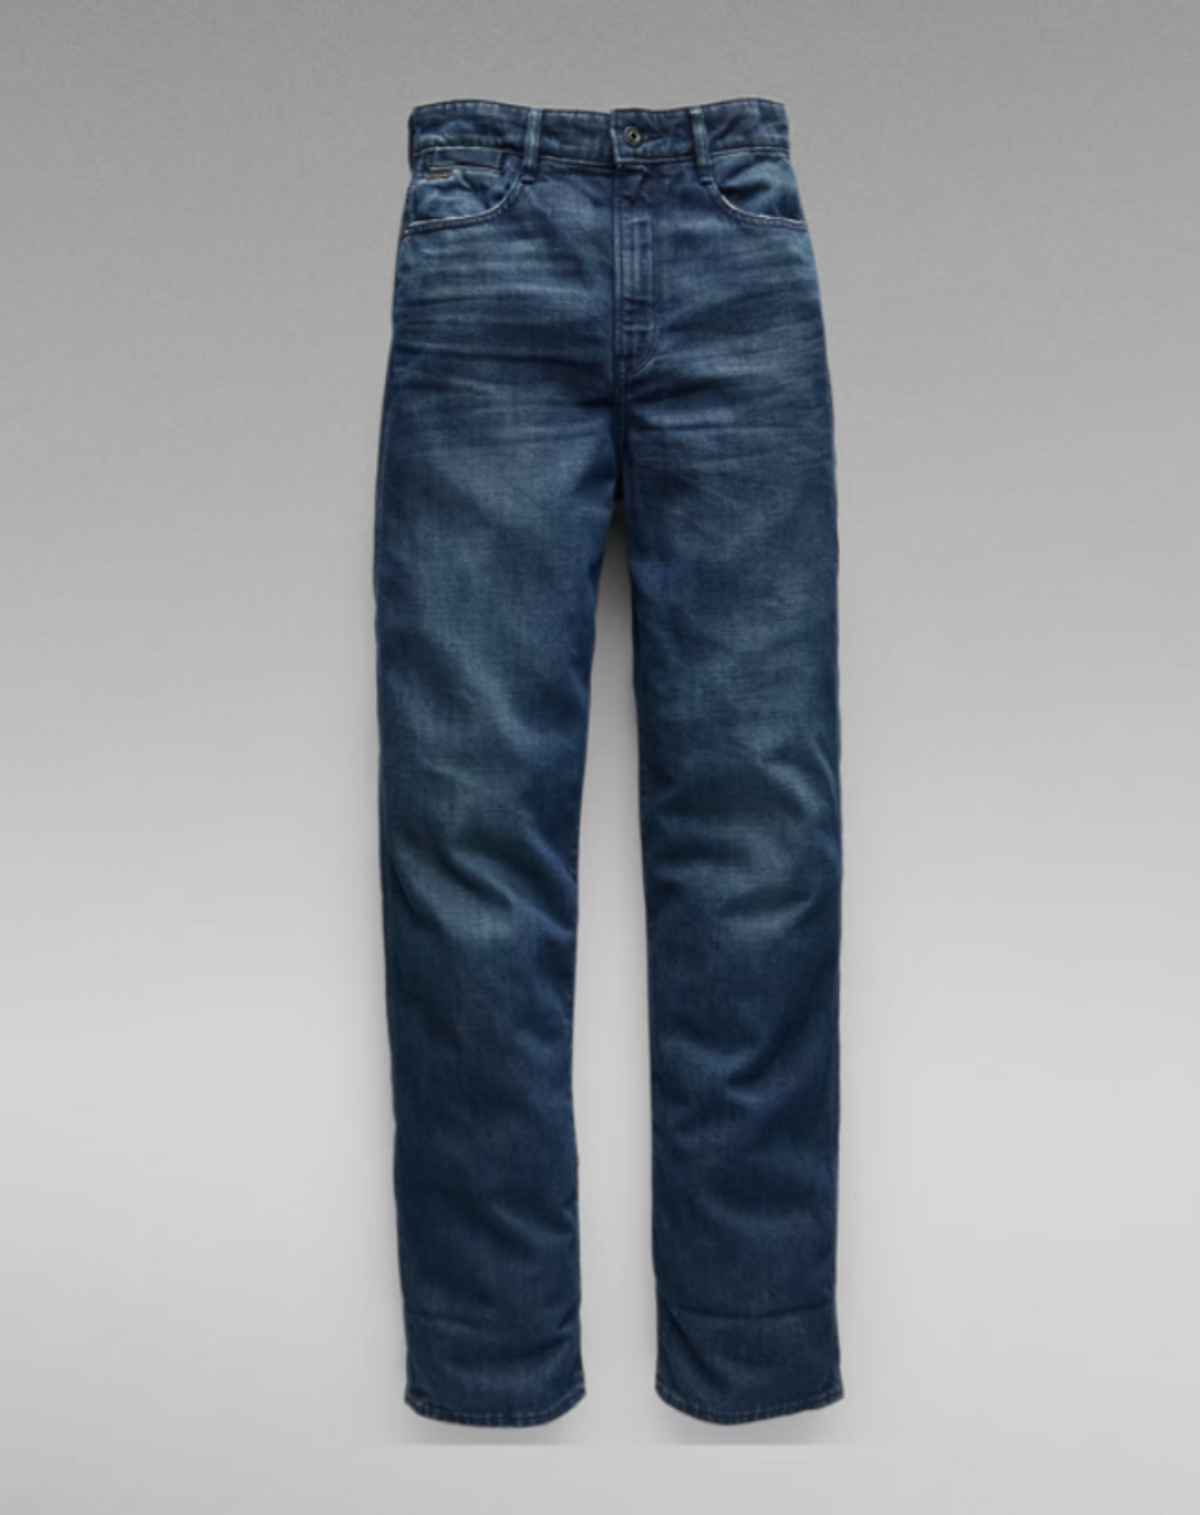 Tedie Ultra High Straight Jeans